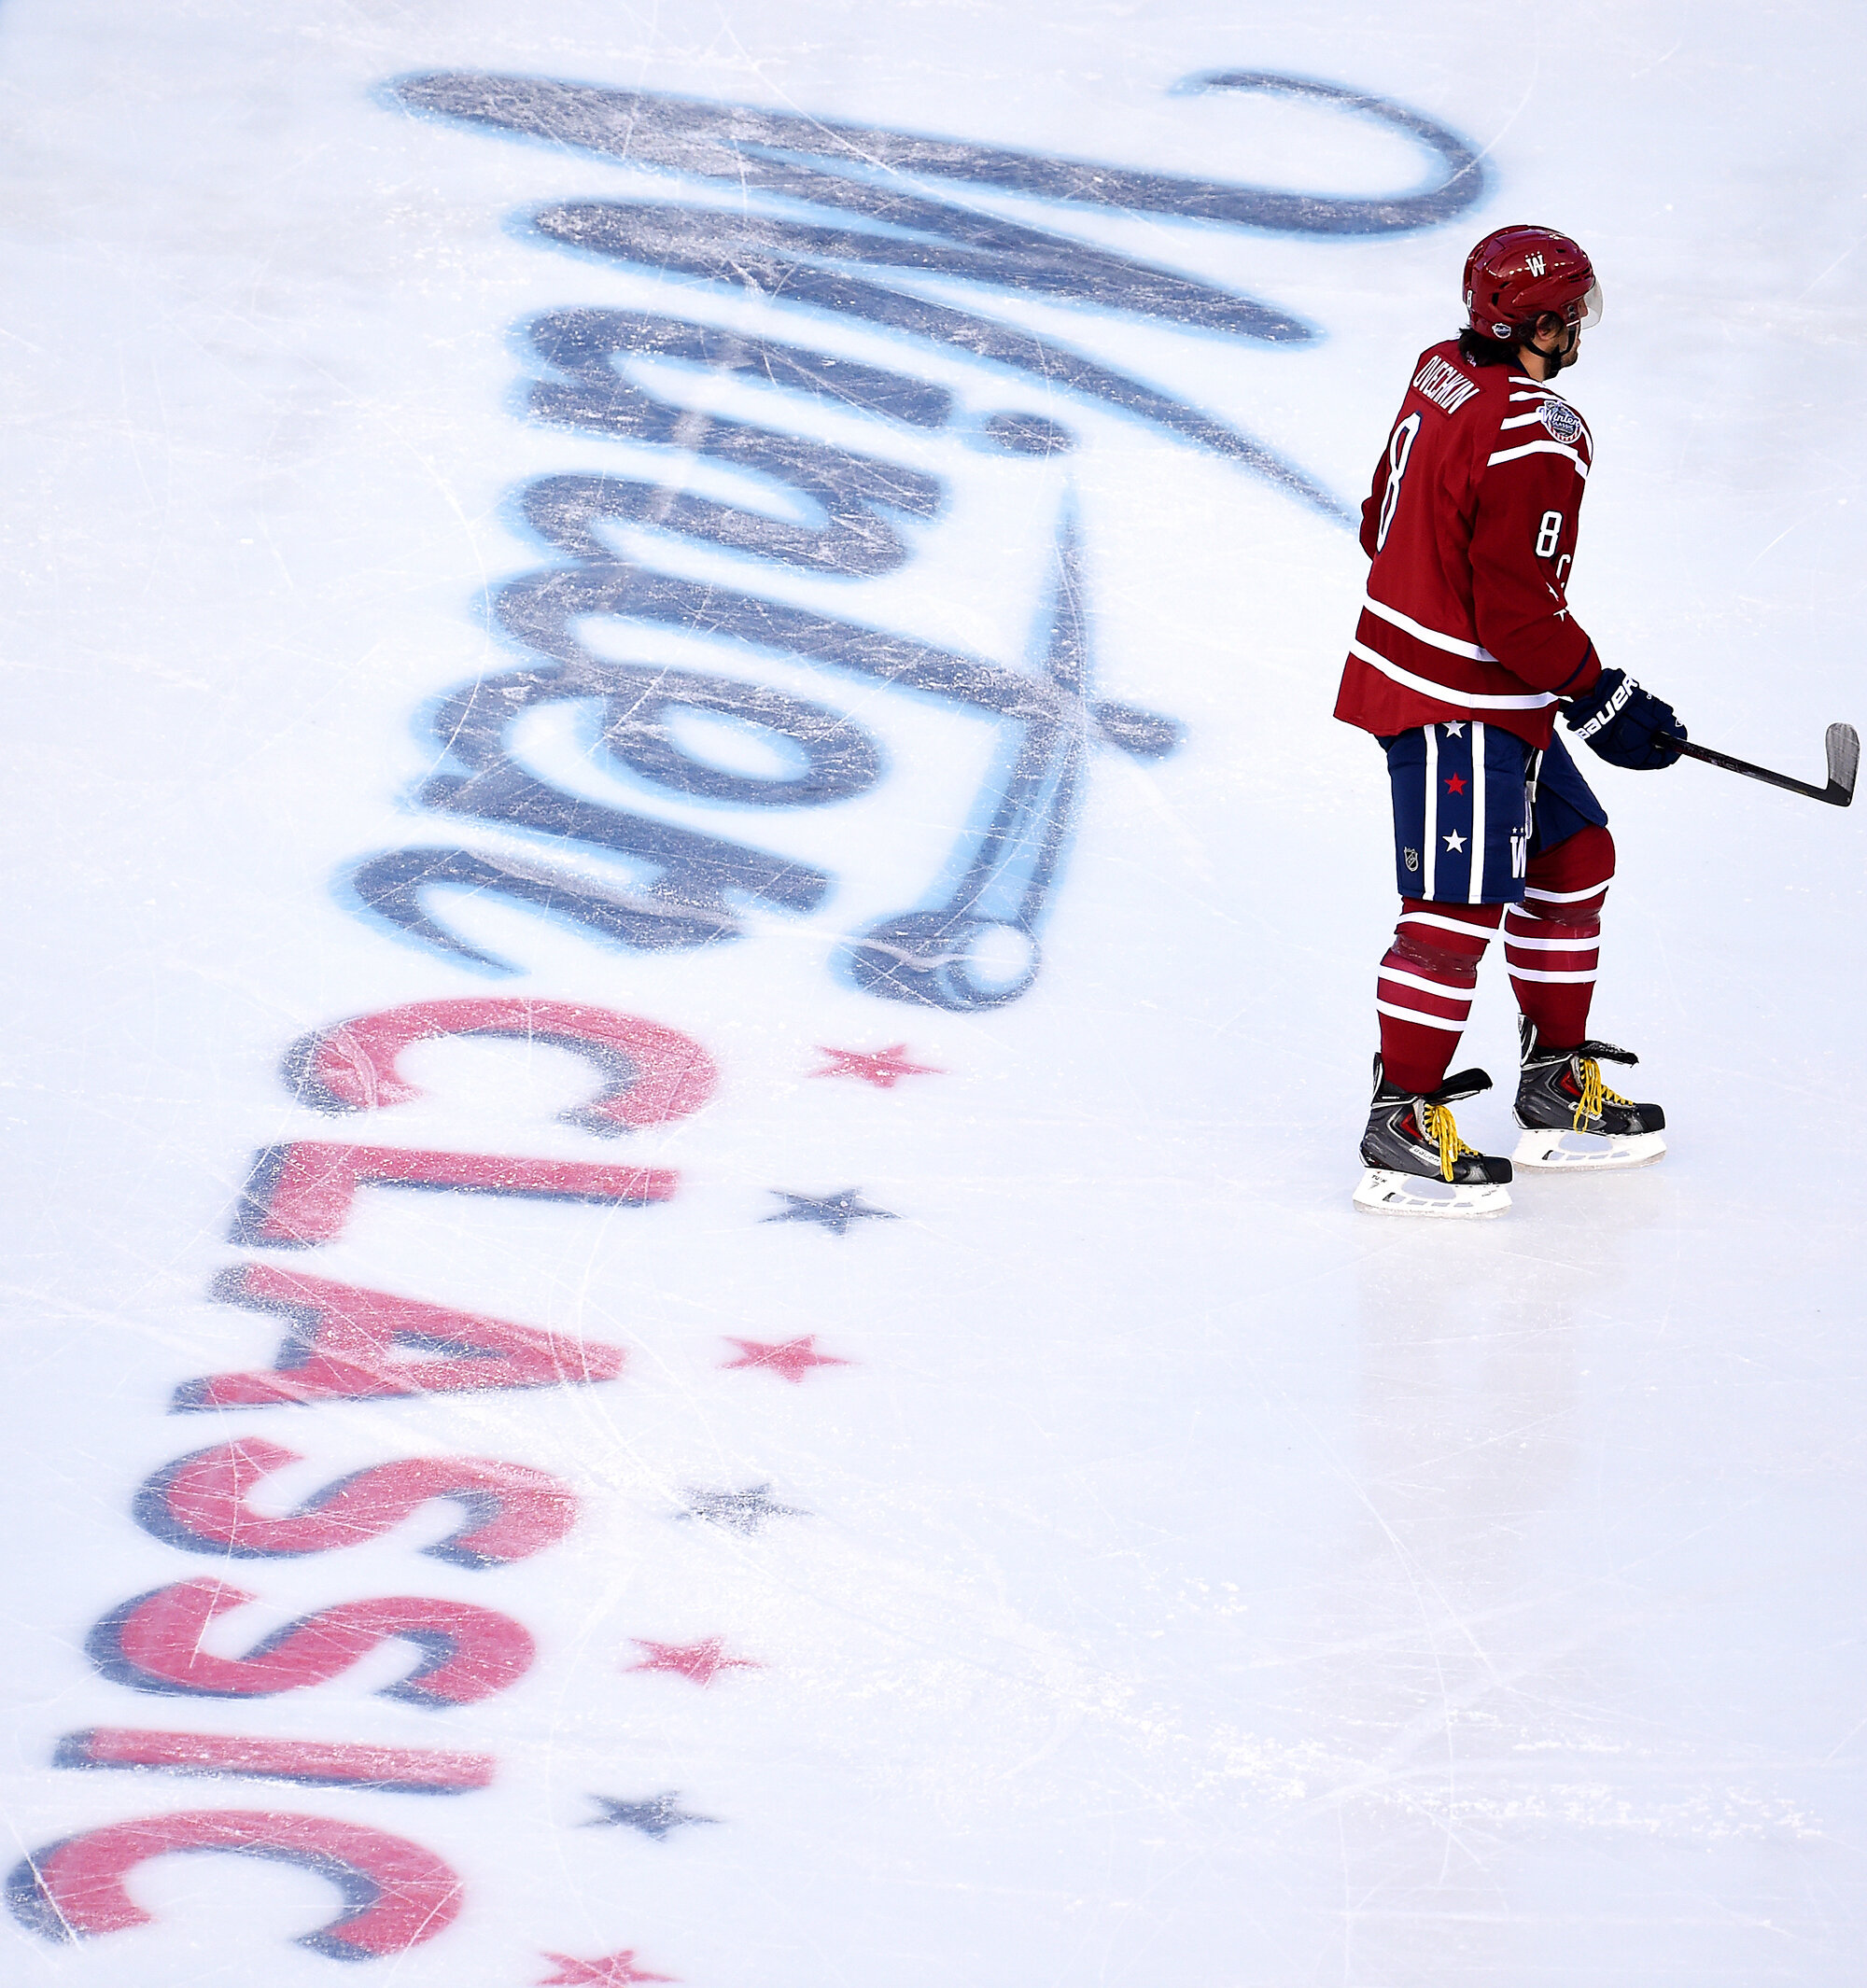 Washington Capitals: A throwback to the 2015 Winter Classic